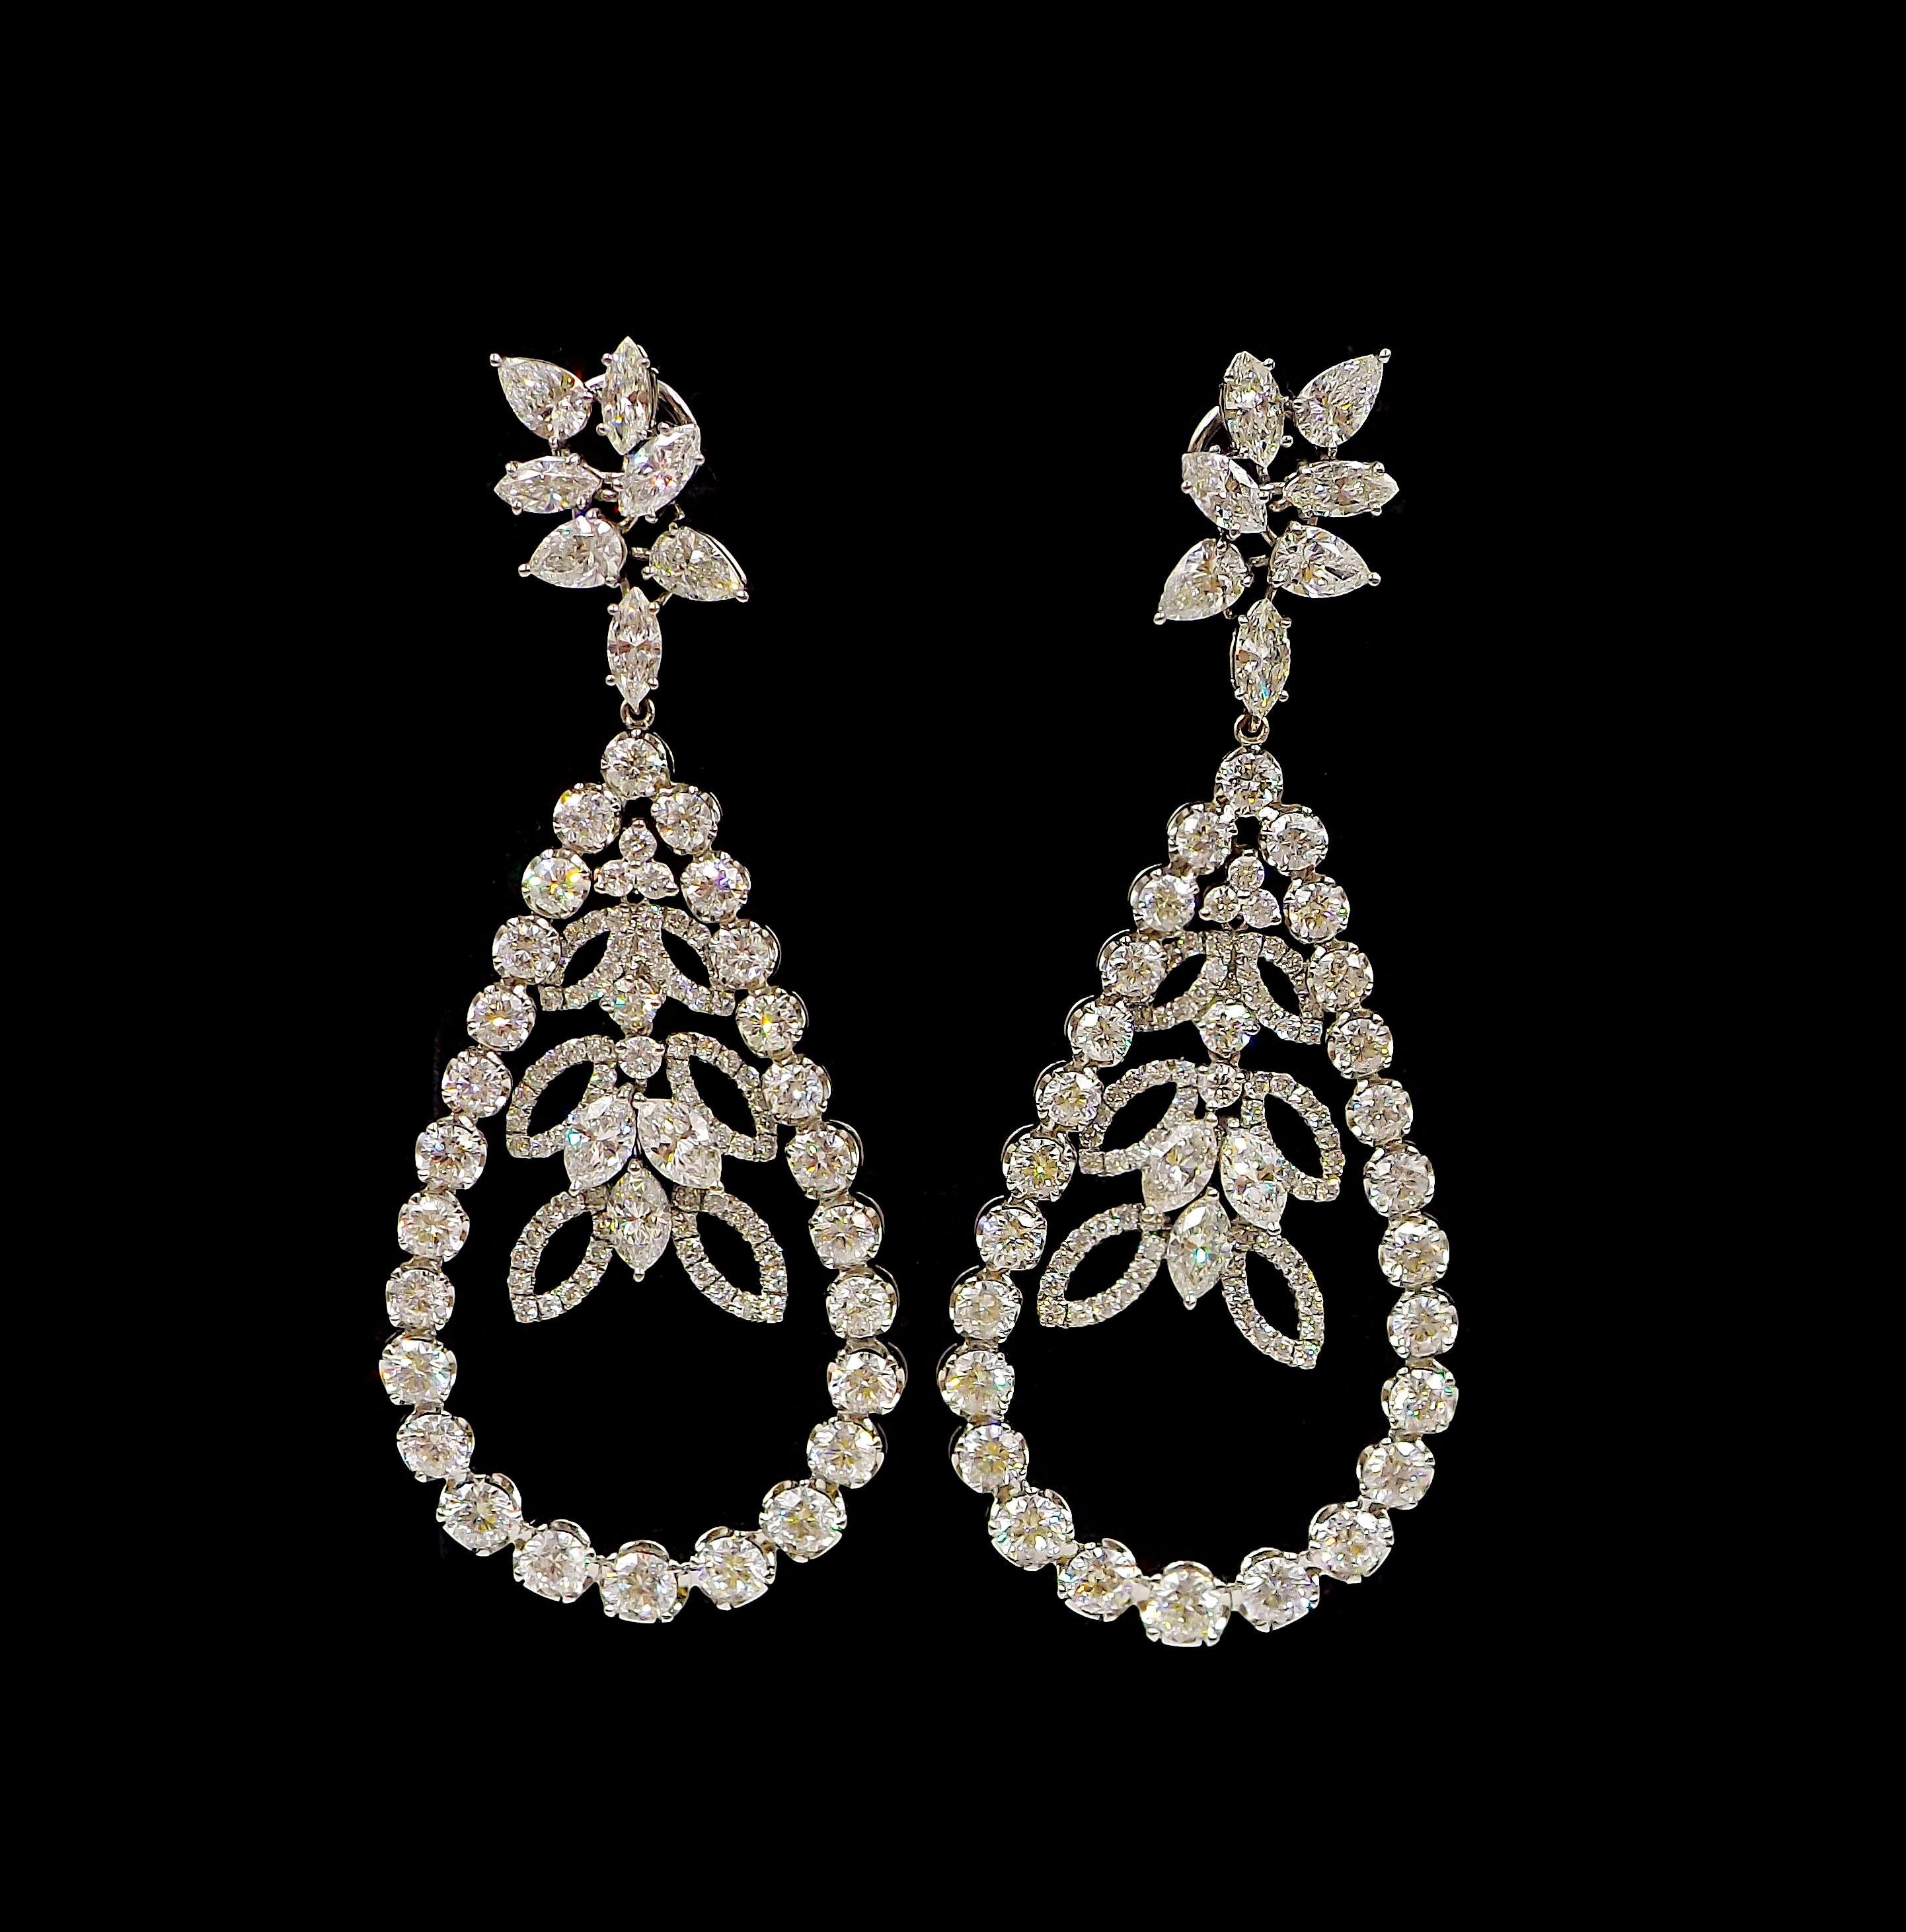 Of teardrop design, each with a central articulated element, set with marquise and round brilliant-cut diamonds; approximate total weight: 16.50 carats; mounted in 18k white gold; length: 3 in.